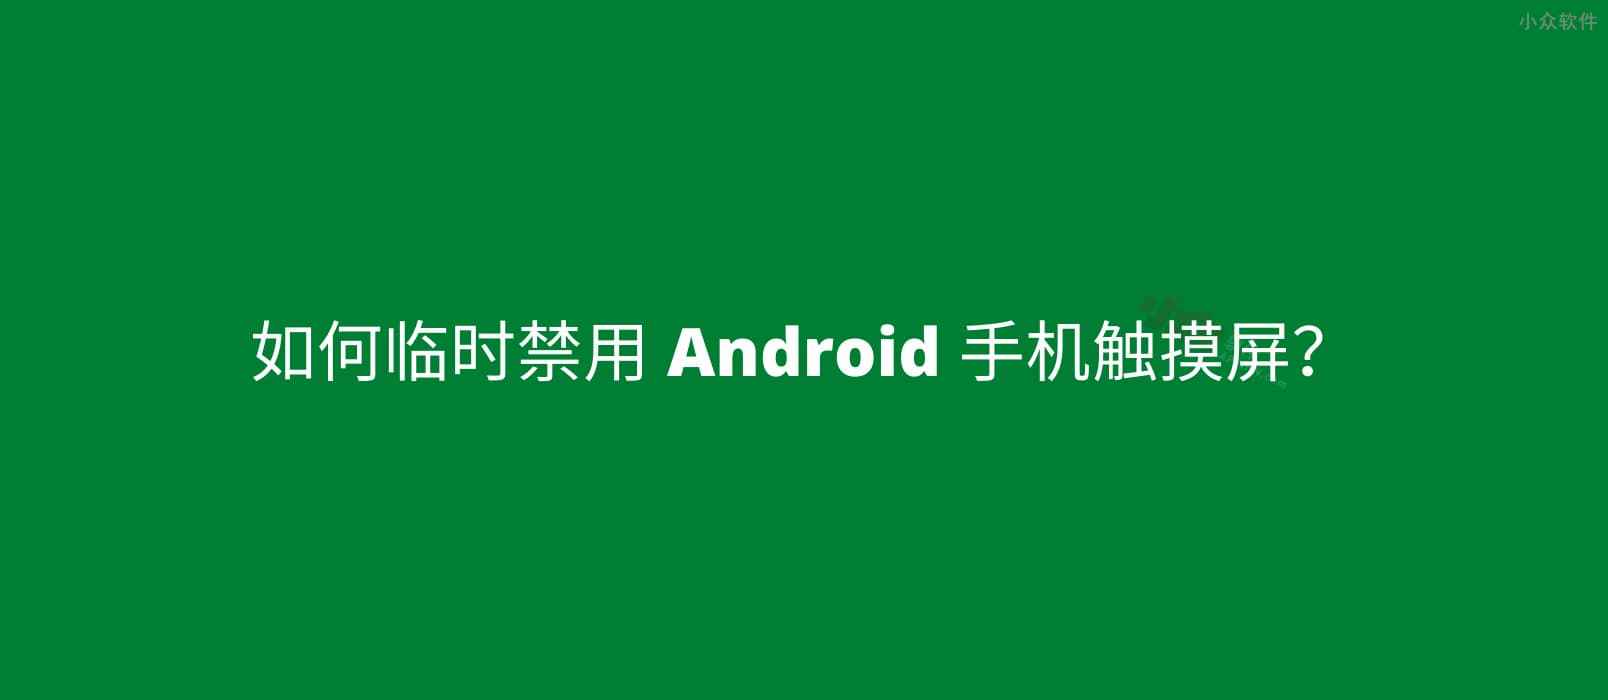 Touch Protector – 临时禁用 Android 手机触摸屏